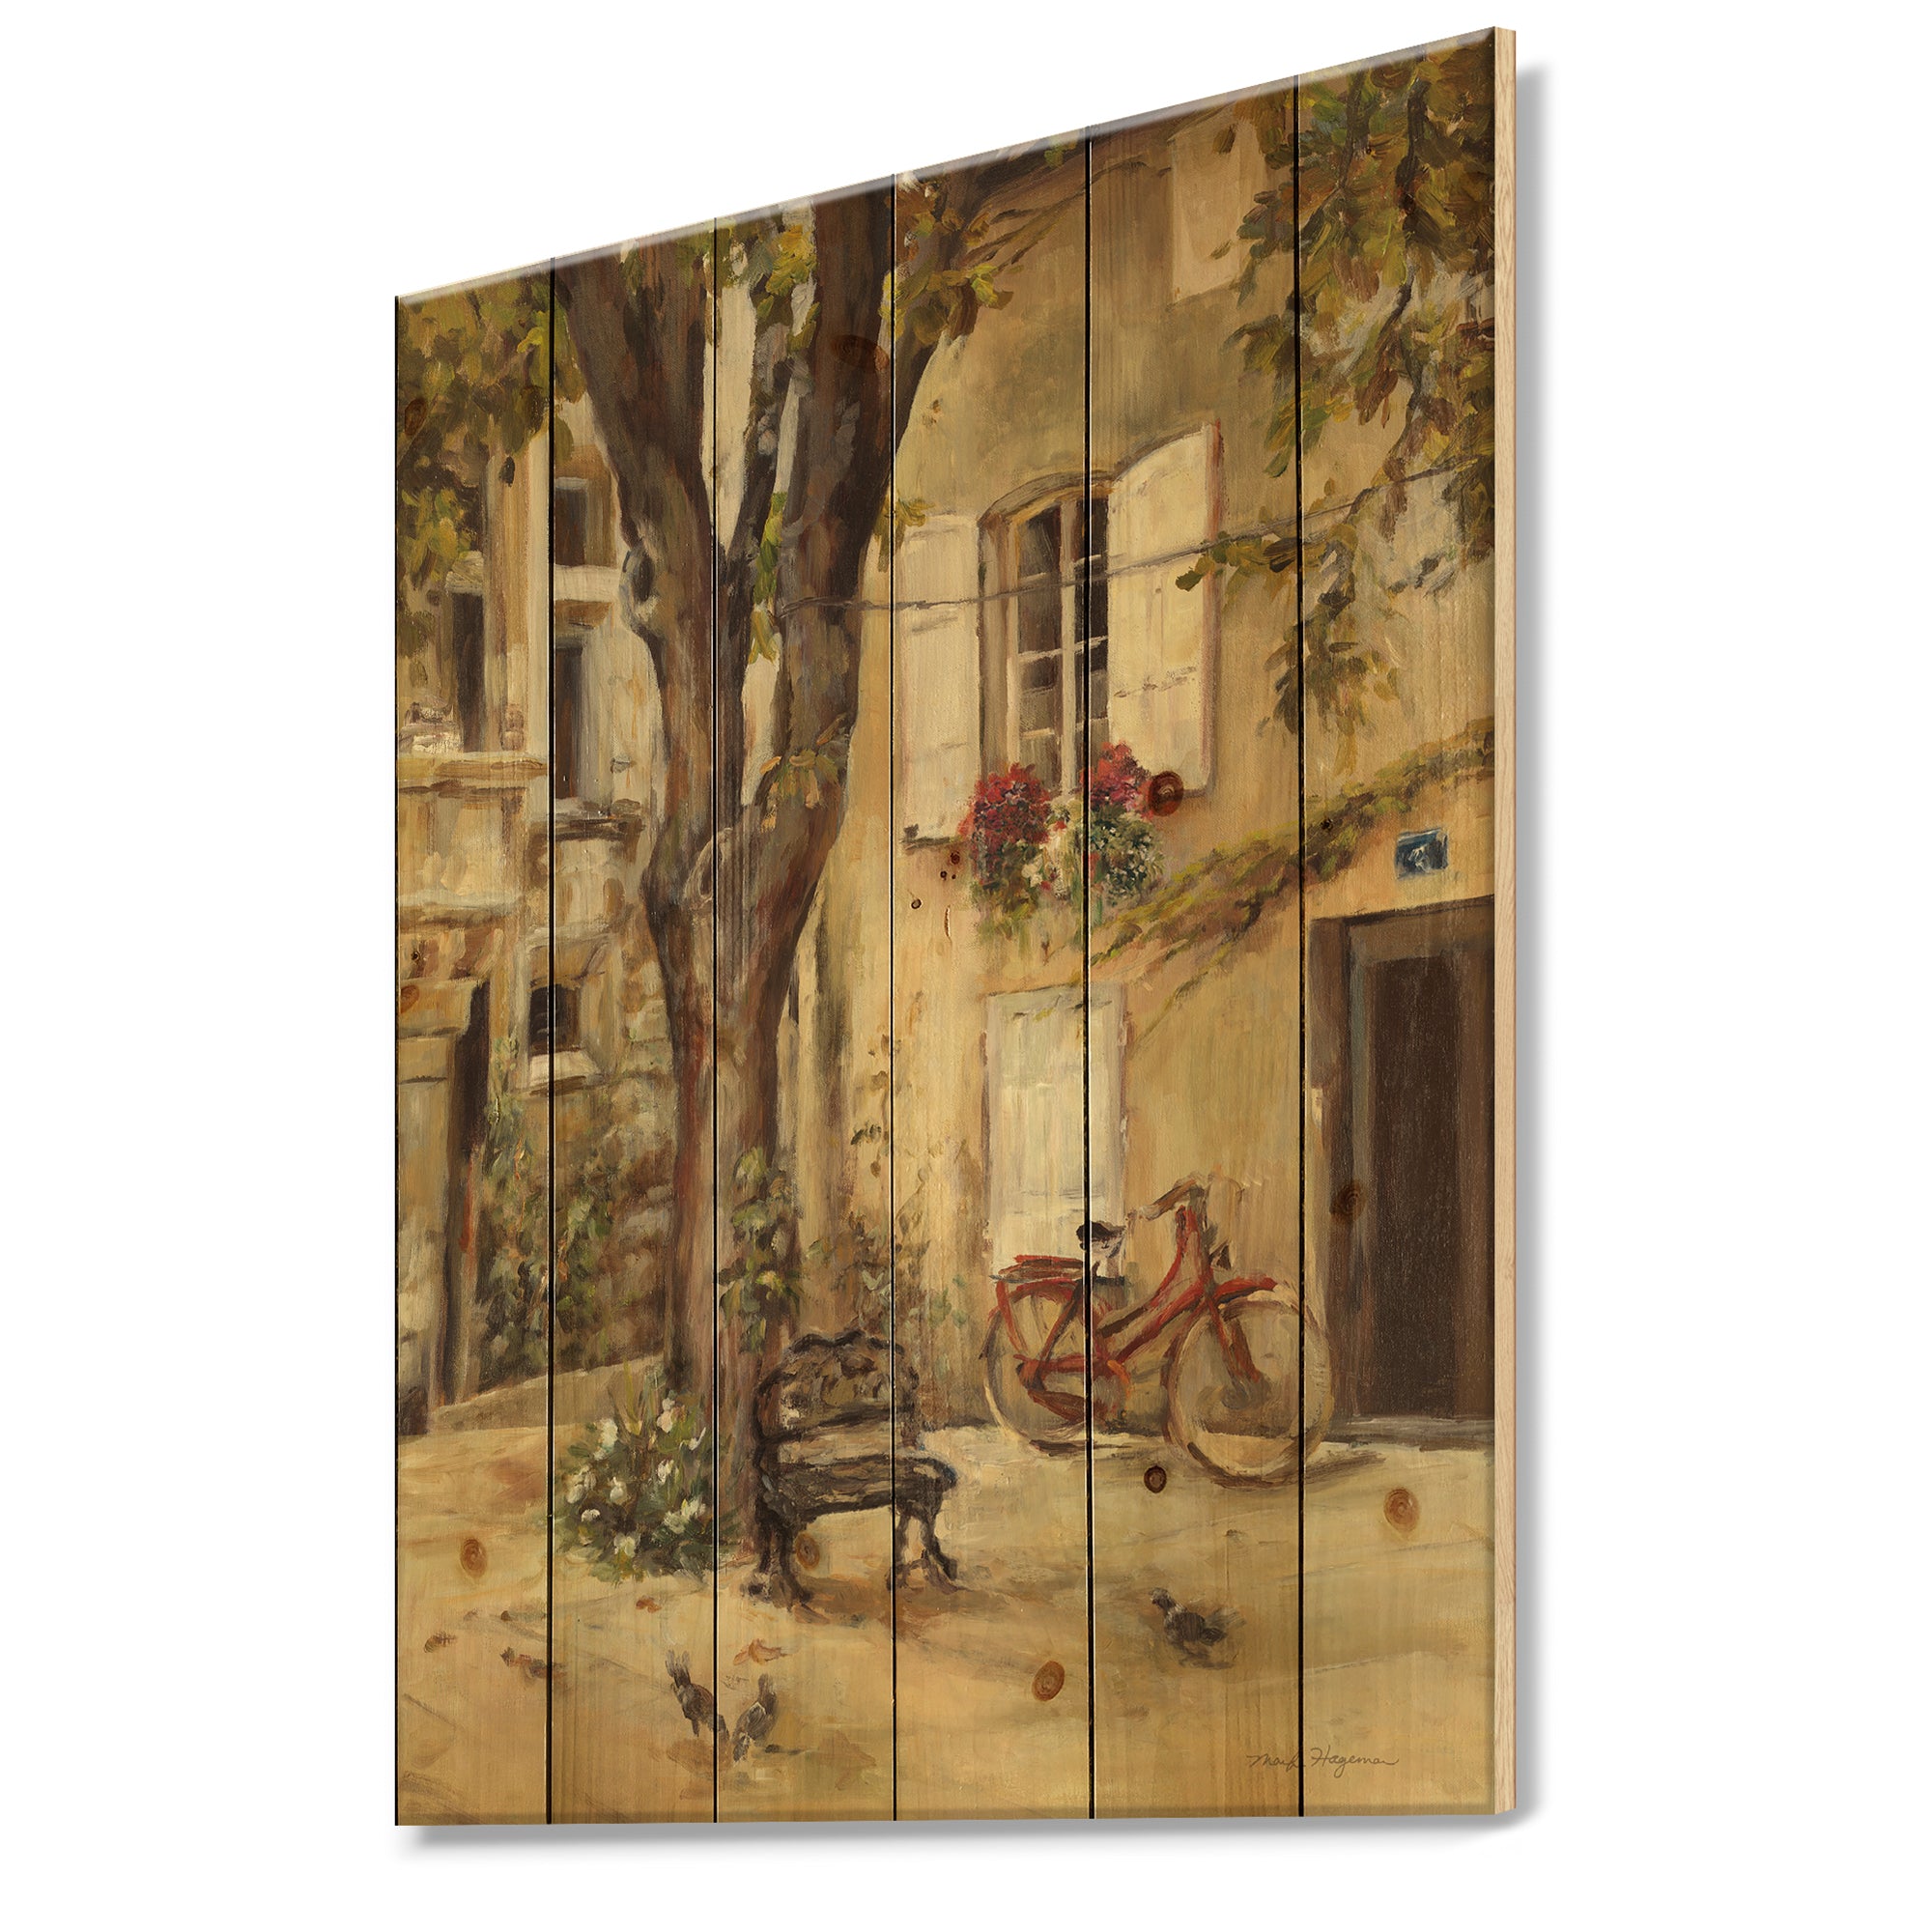 Provence French Village I - French Country Print on Natural Pine Wood - 15x20